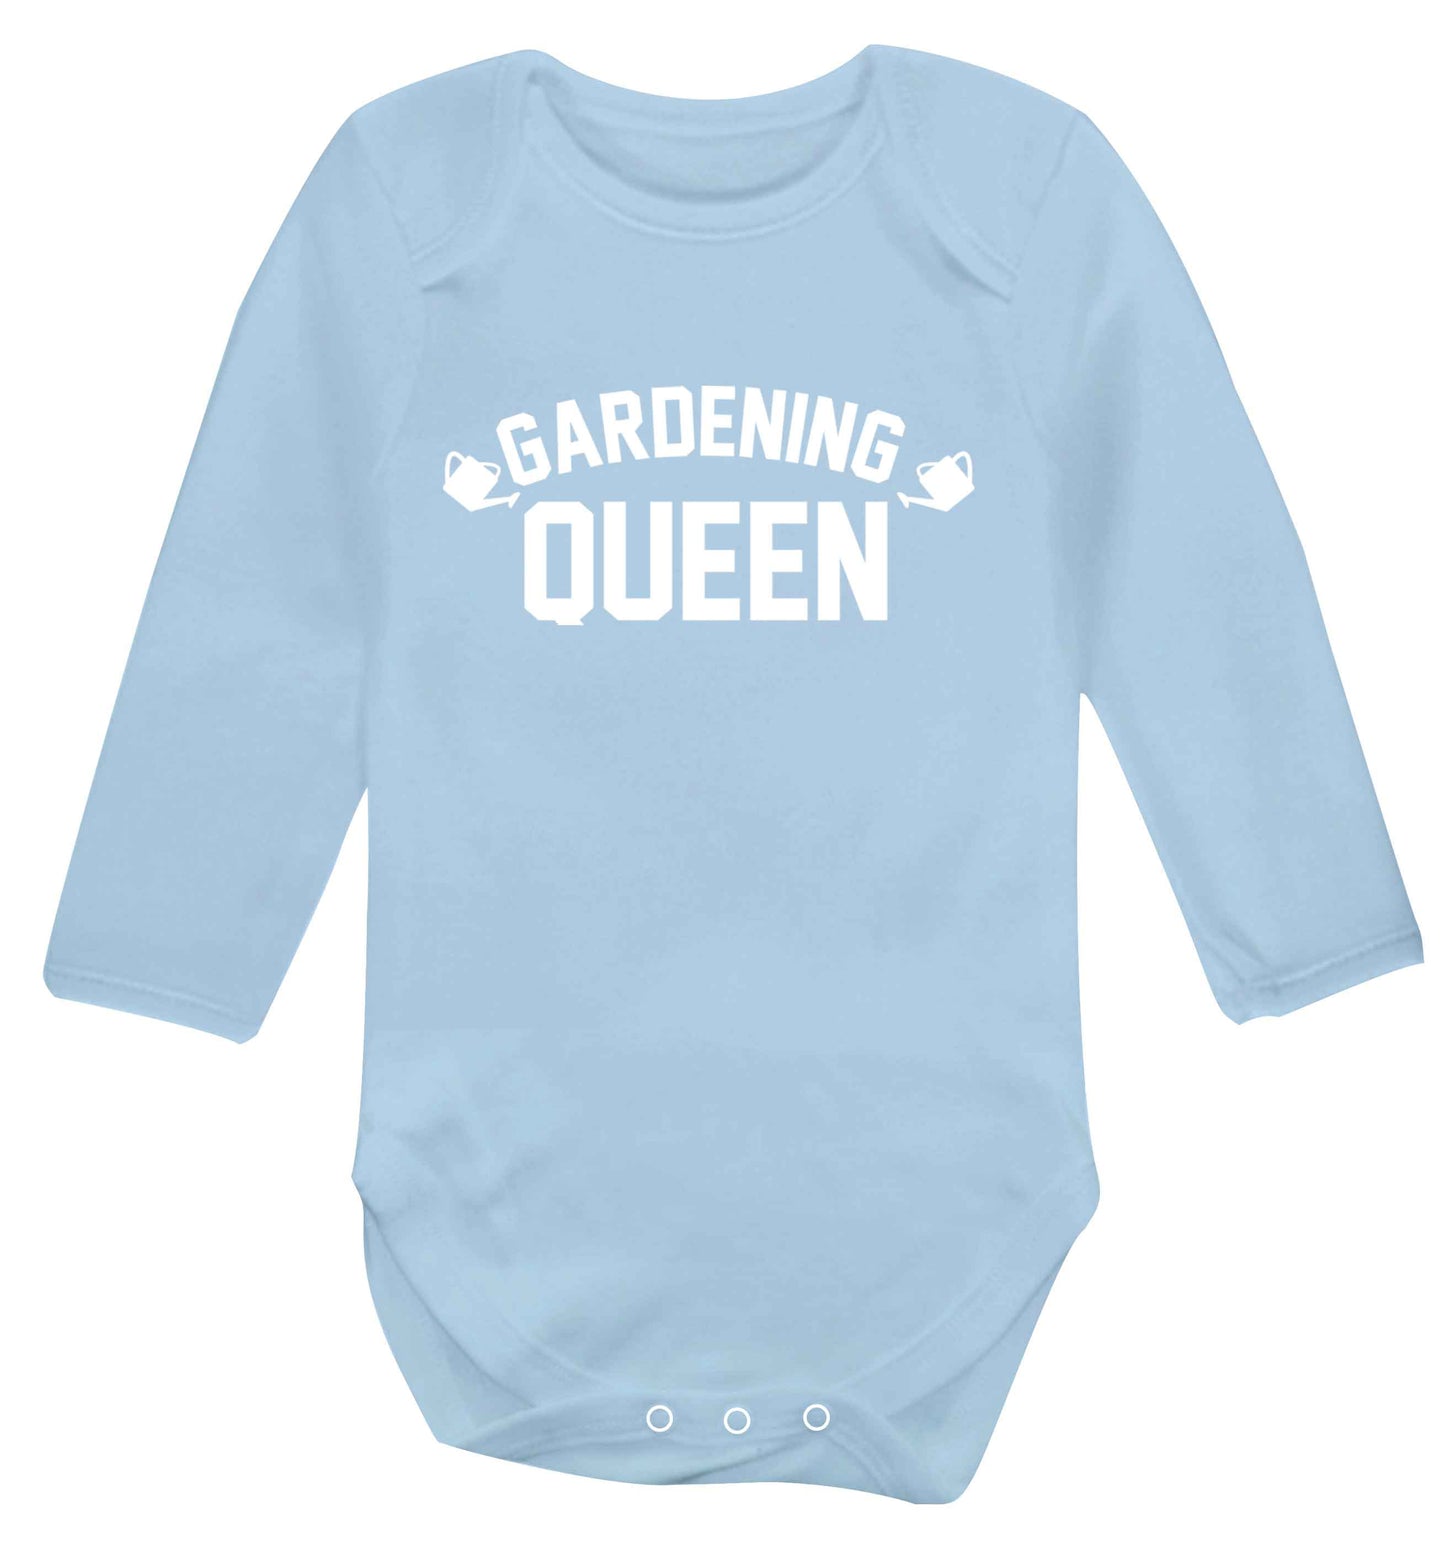 Gardening queen Baby Vest long sleeved pale blue 6-12 months